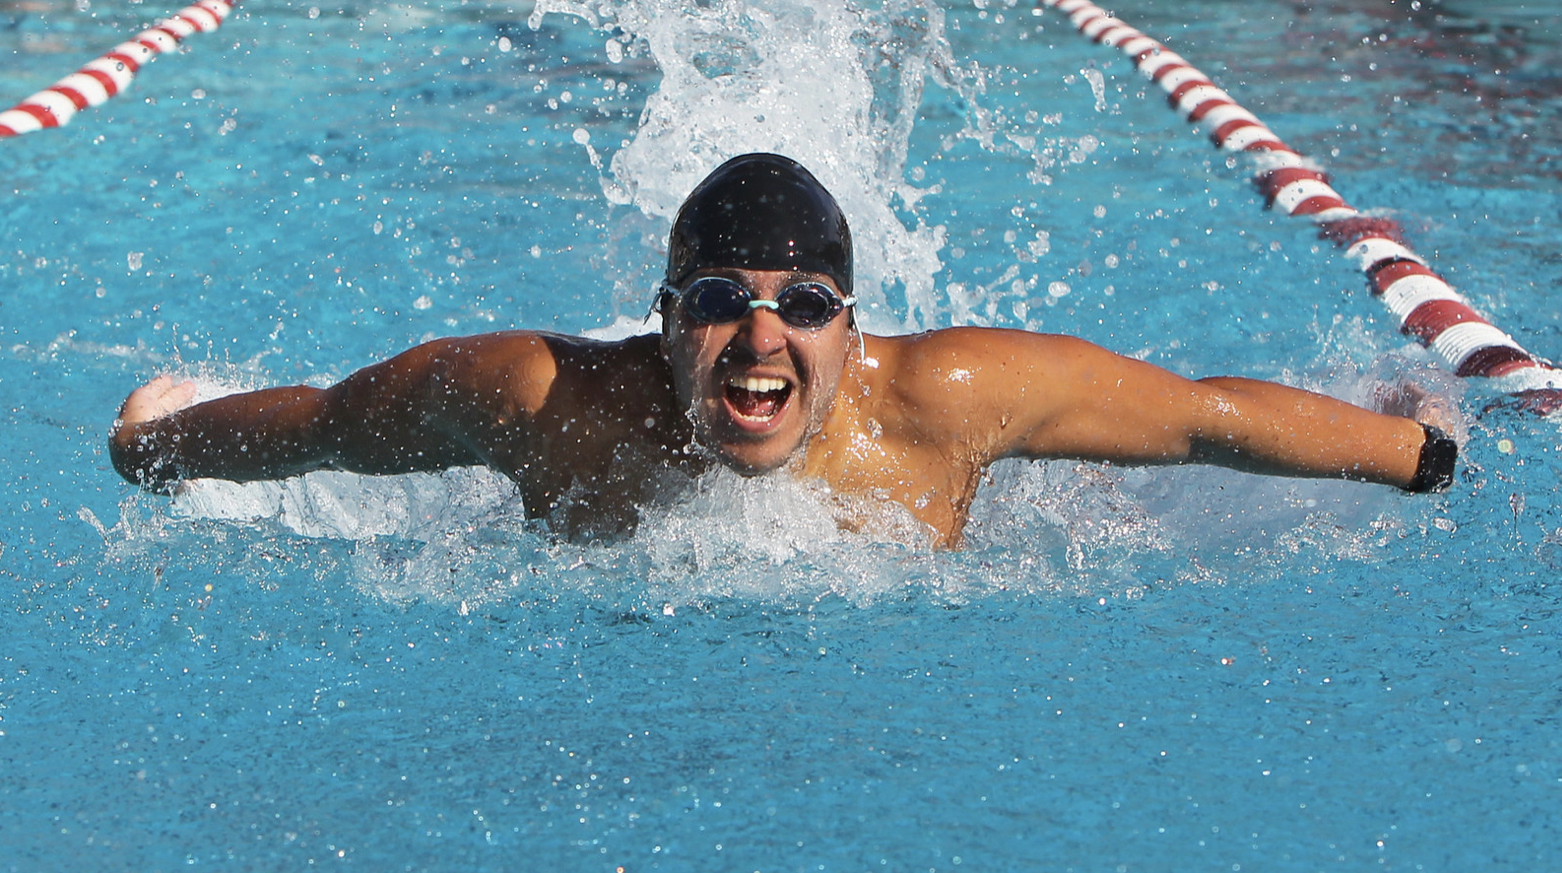 A man swims in a pool with a butterfly stroke.